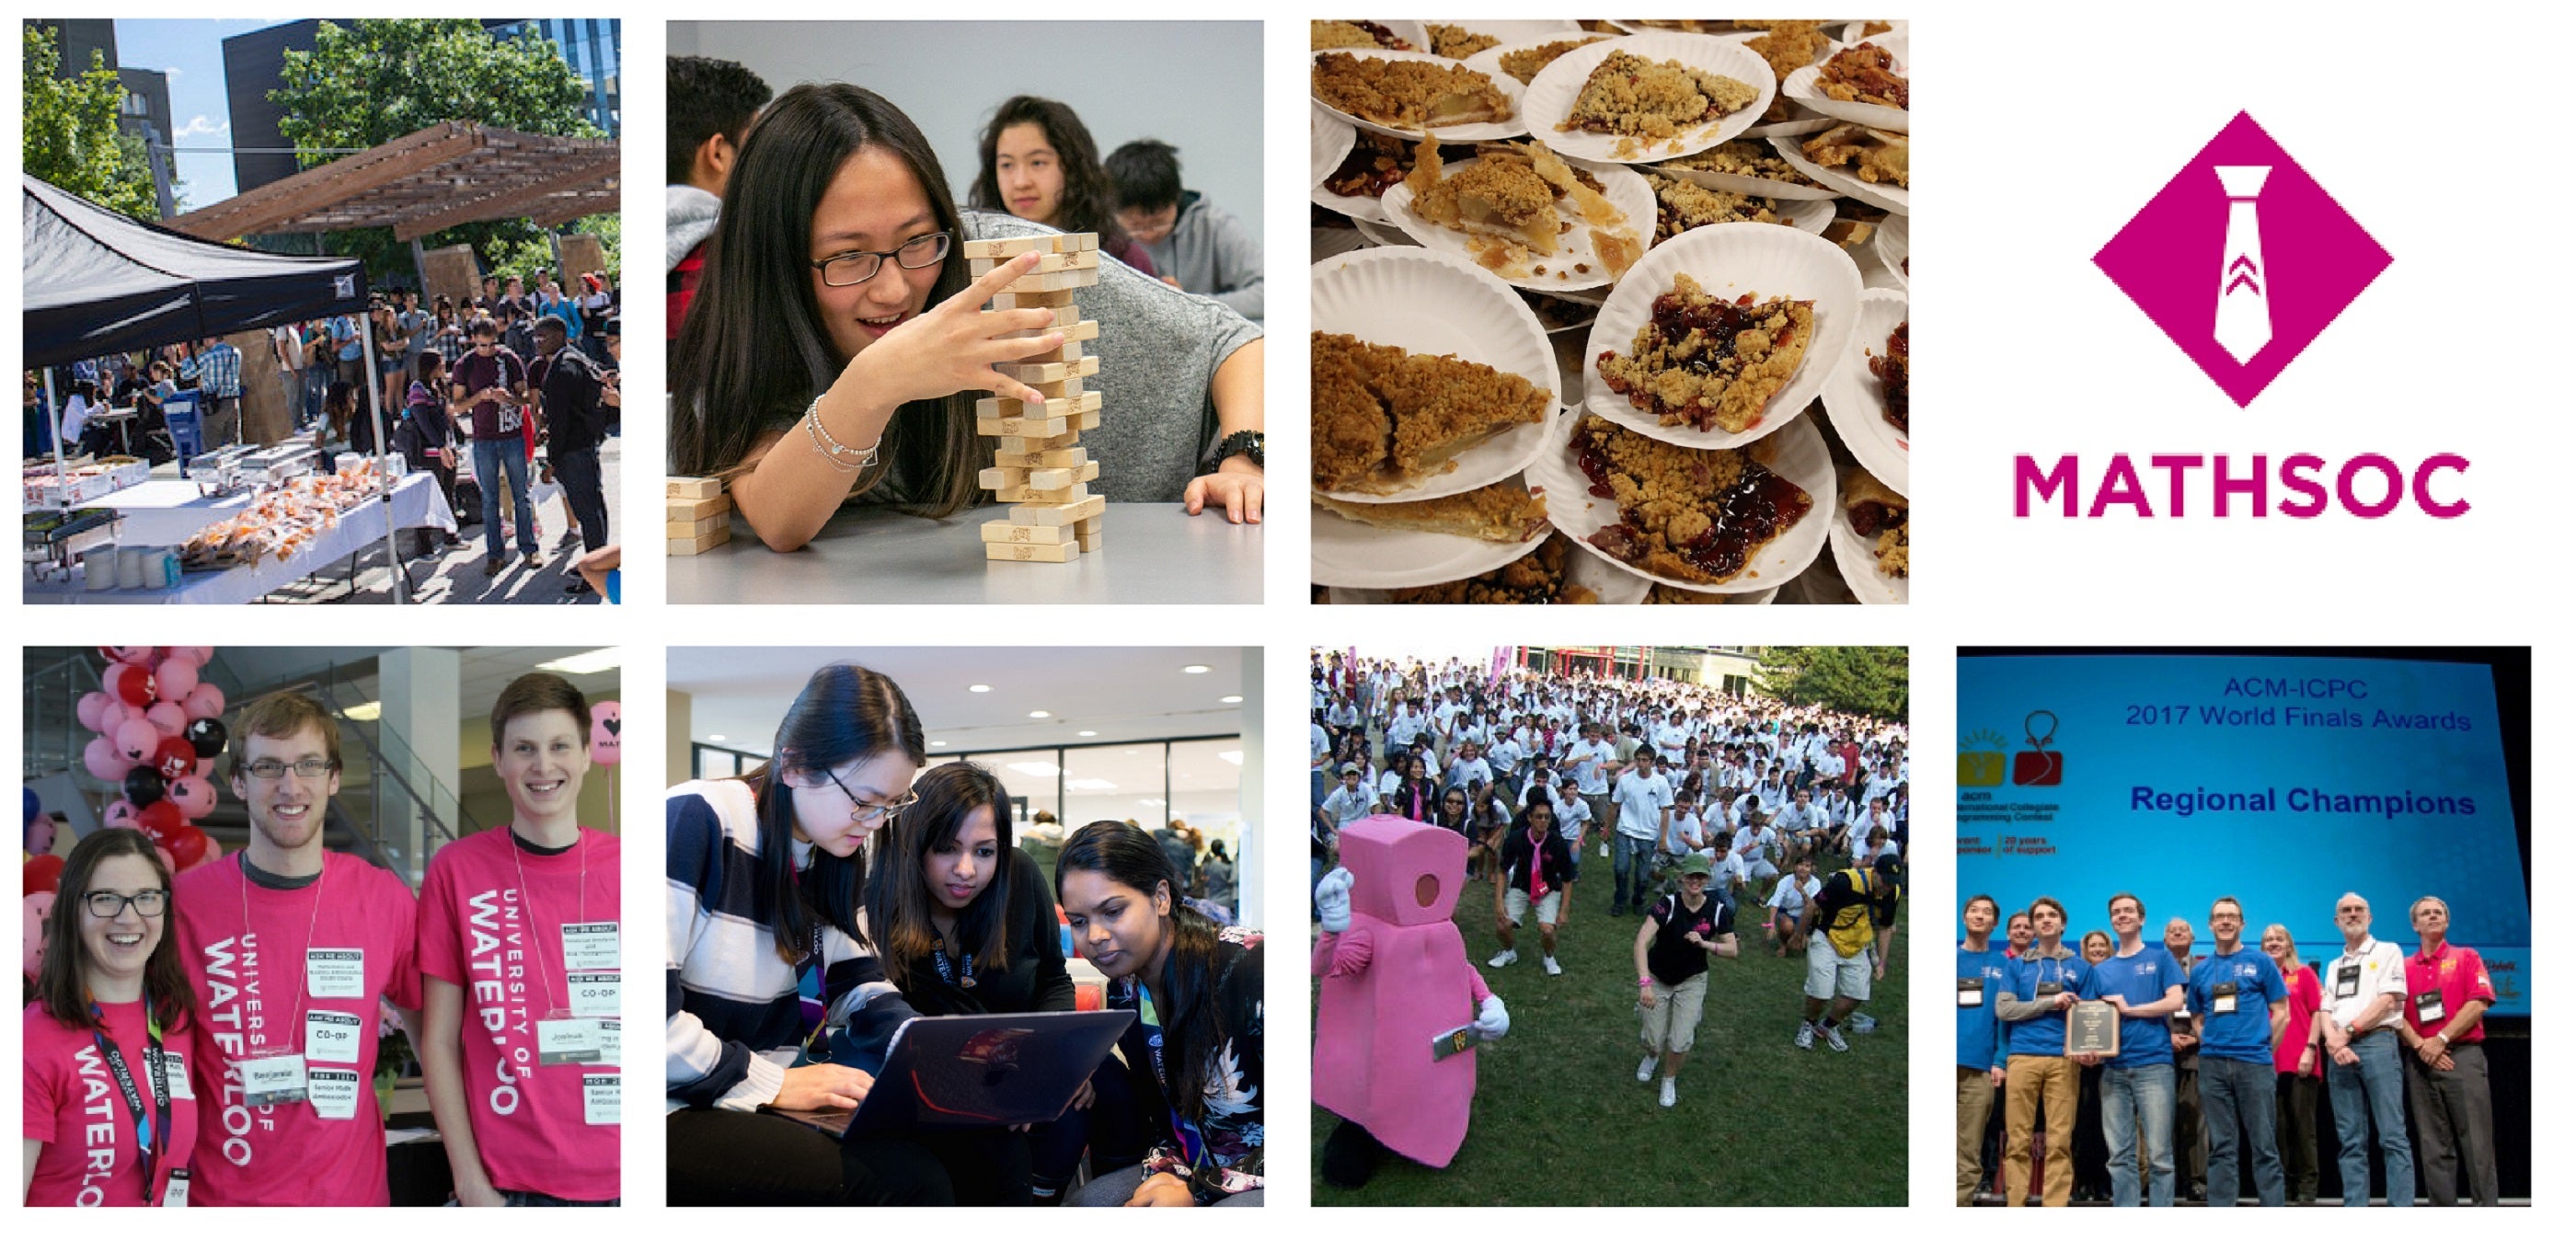 Photo collage of students volunteering, competing, eating pie and playing games